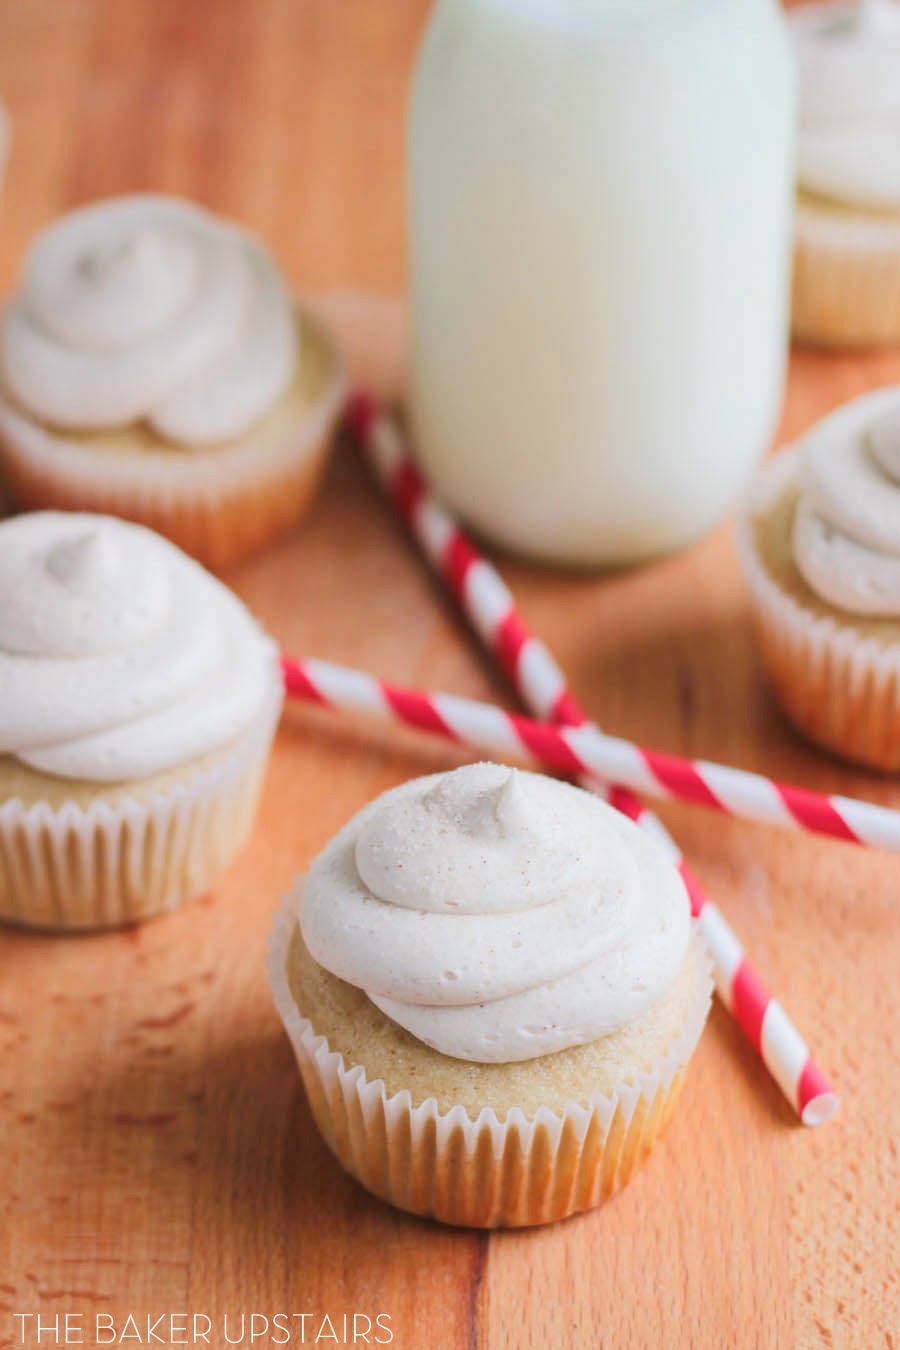 These snickerdoodle cupcakes have all the sweet cinnamon flavor you love in the cookies, but in cupcake form!